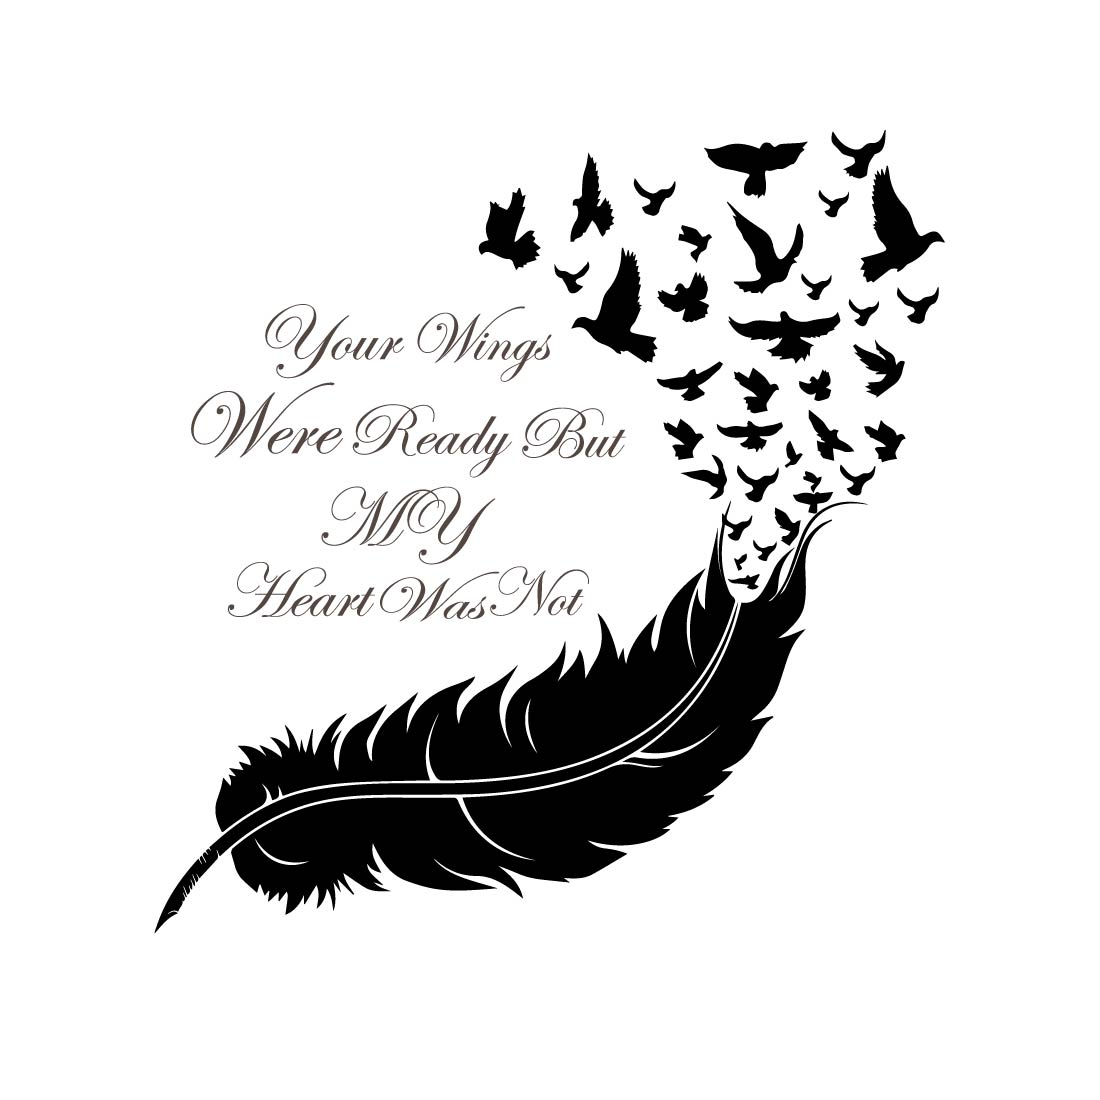 Feather svg bundle, Feather birds svg, dxf, png, jpg, Feathers Silhouette, Boho feather svg, Tribal feather svg, Instant Download preview image.